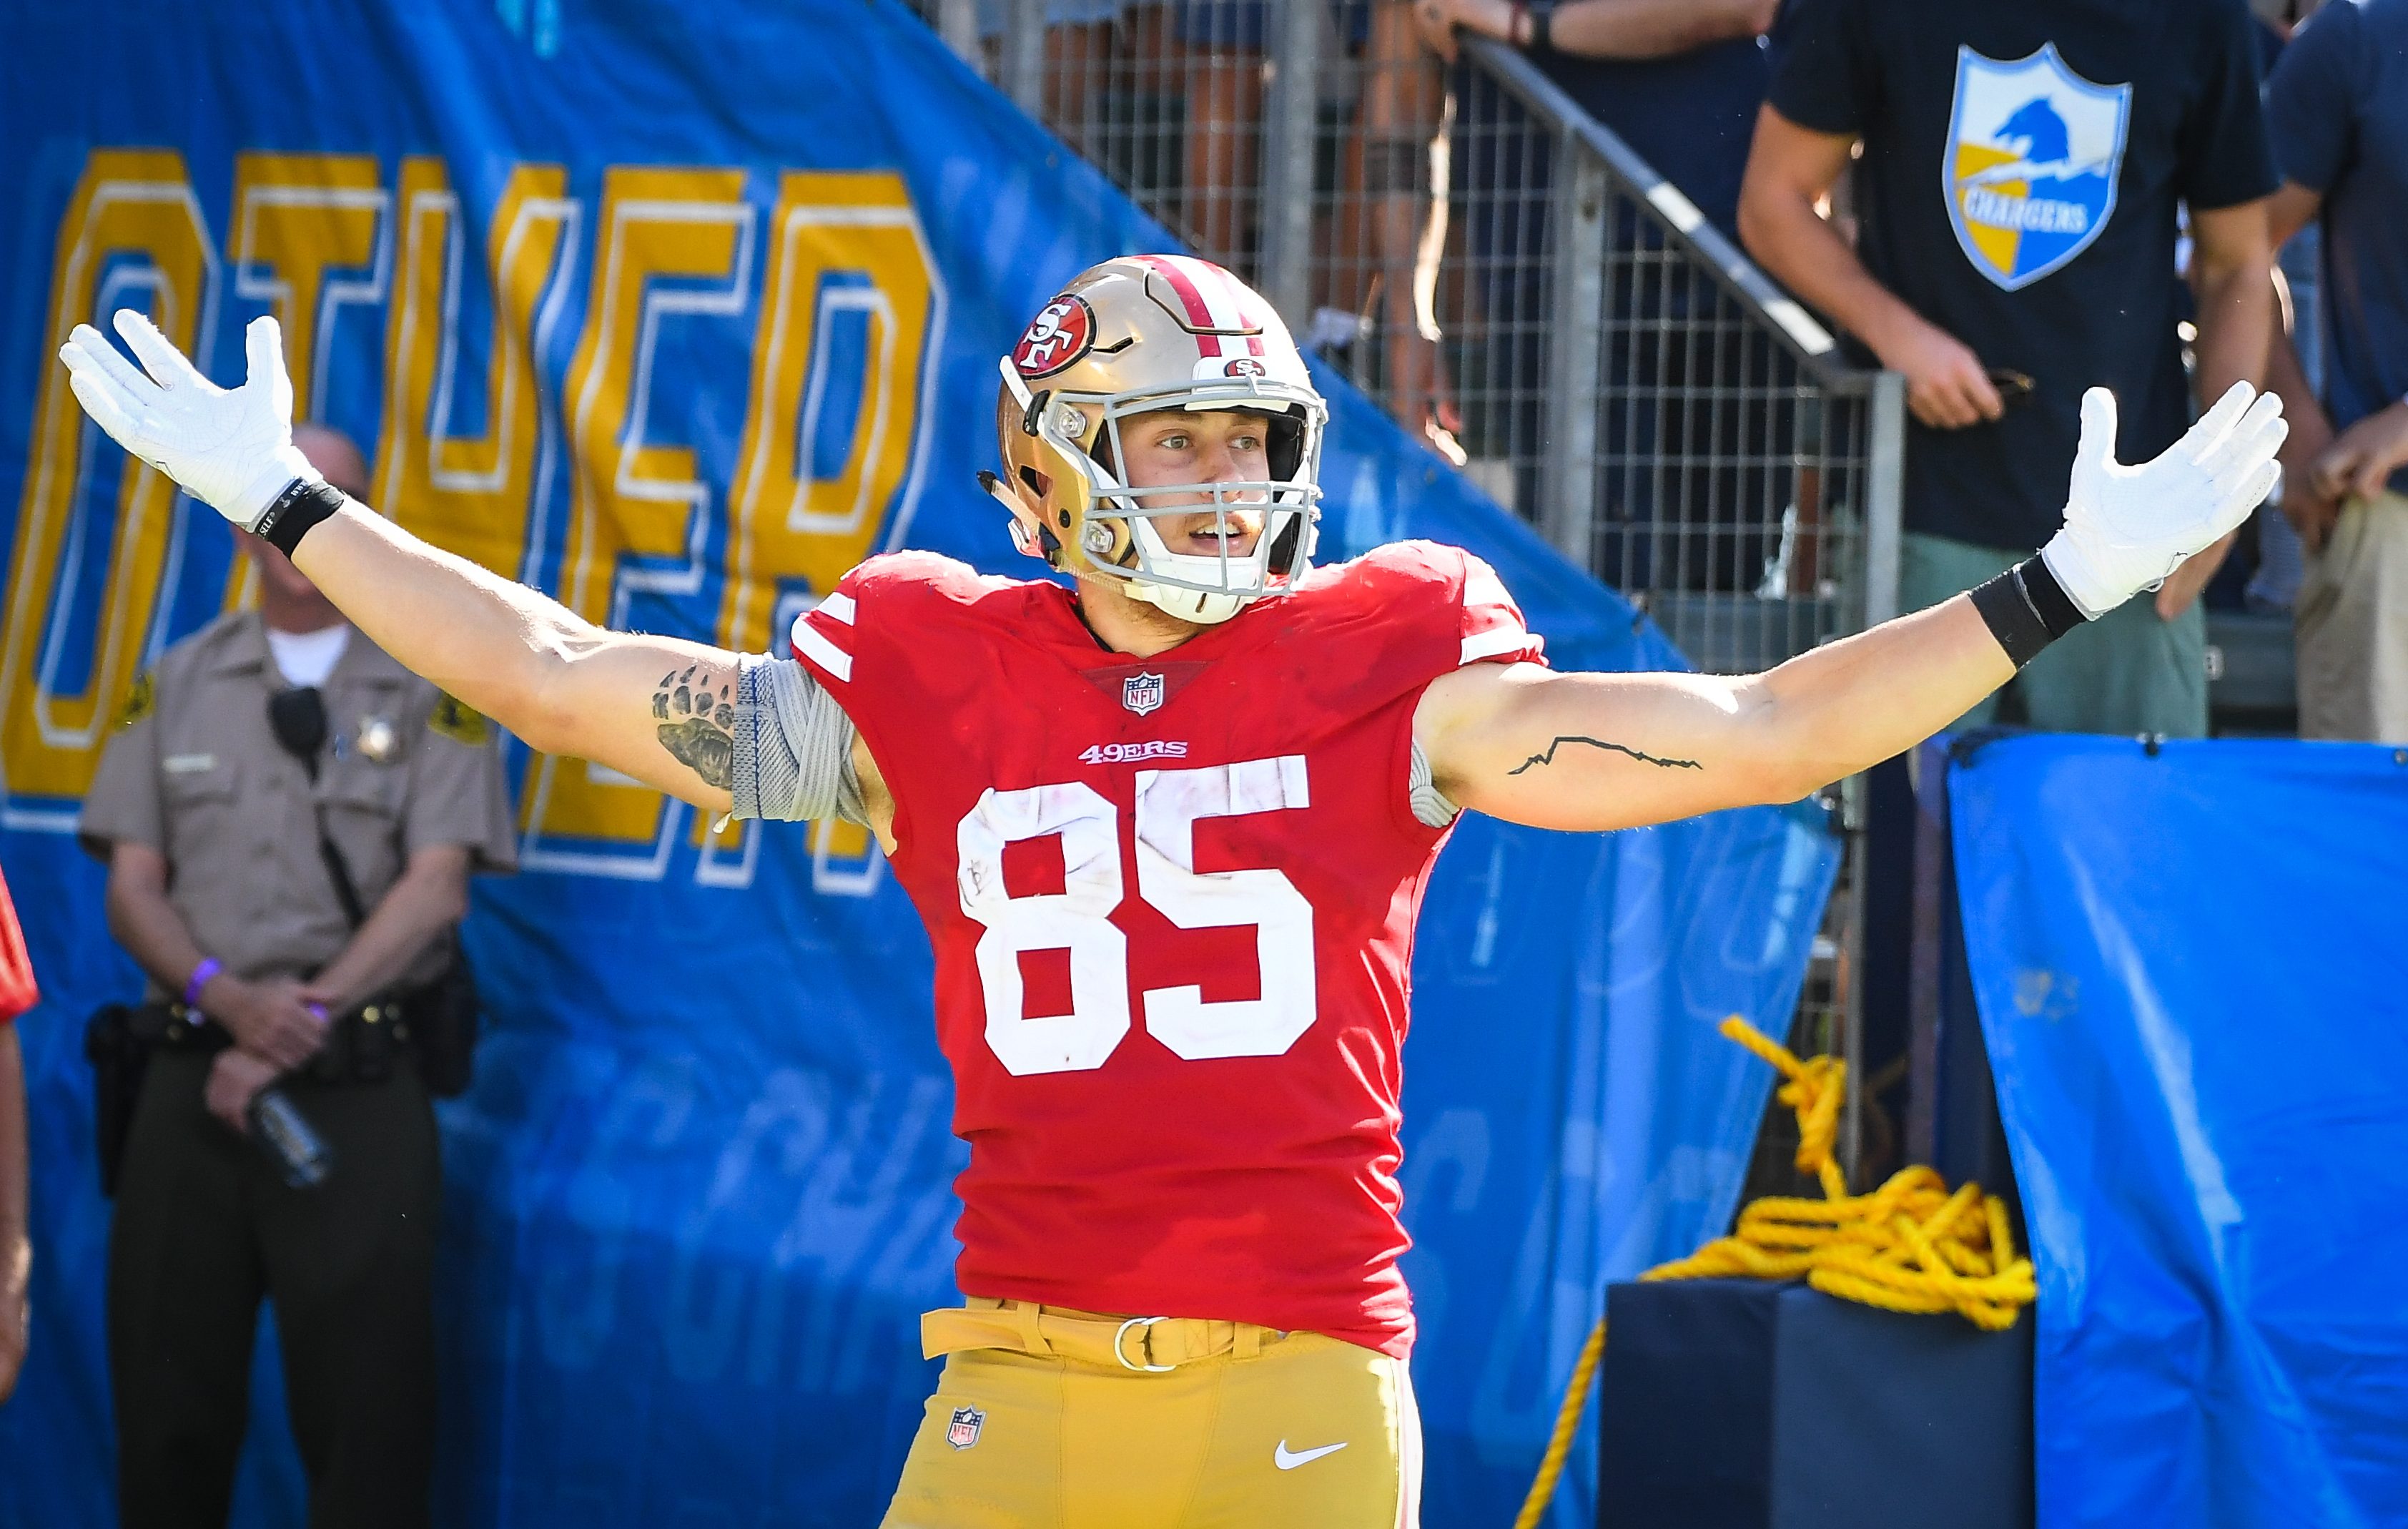 David Lombardi sur Twitter  George Kittle and Chase Harrell share very  similar 40 times and triceps tattoos so theres that  Twitter